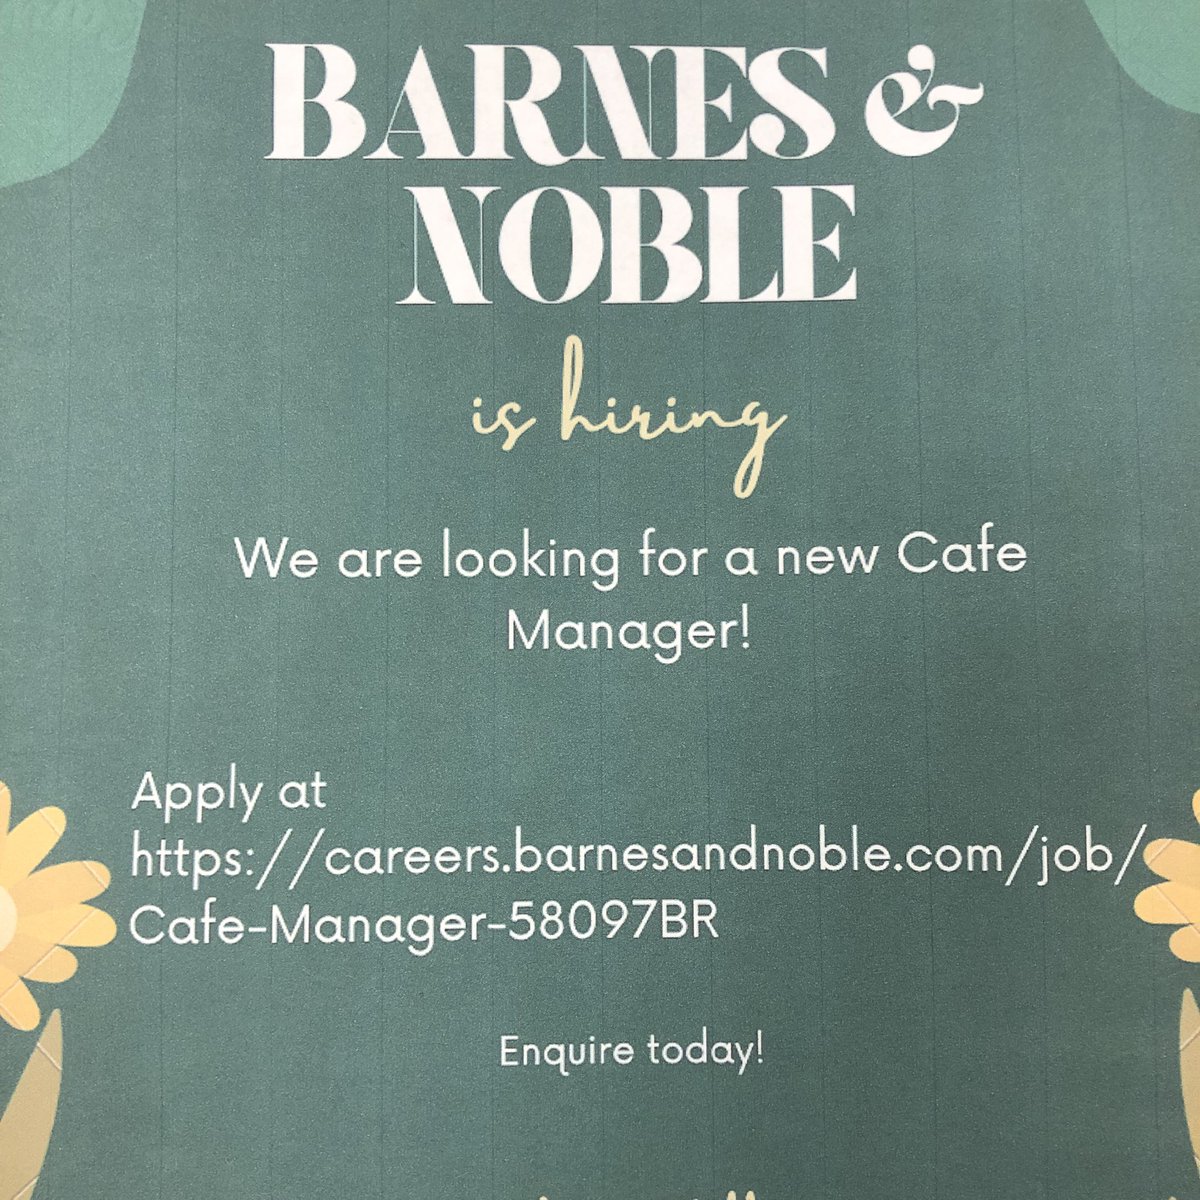 Do you love coffee and books? Do you have managerial experience? Get paid to talk about your passions and apply today to be our new Cafe Manager! careers.barnesandnoble.com/job/Cafe-Manag…